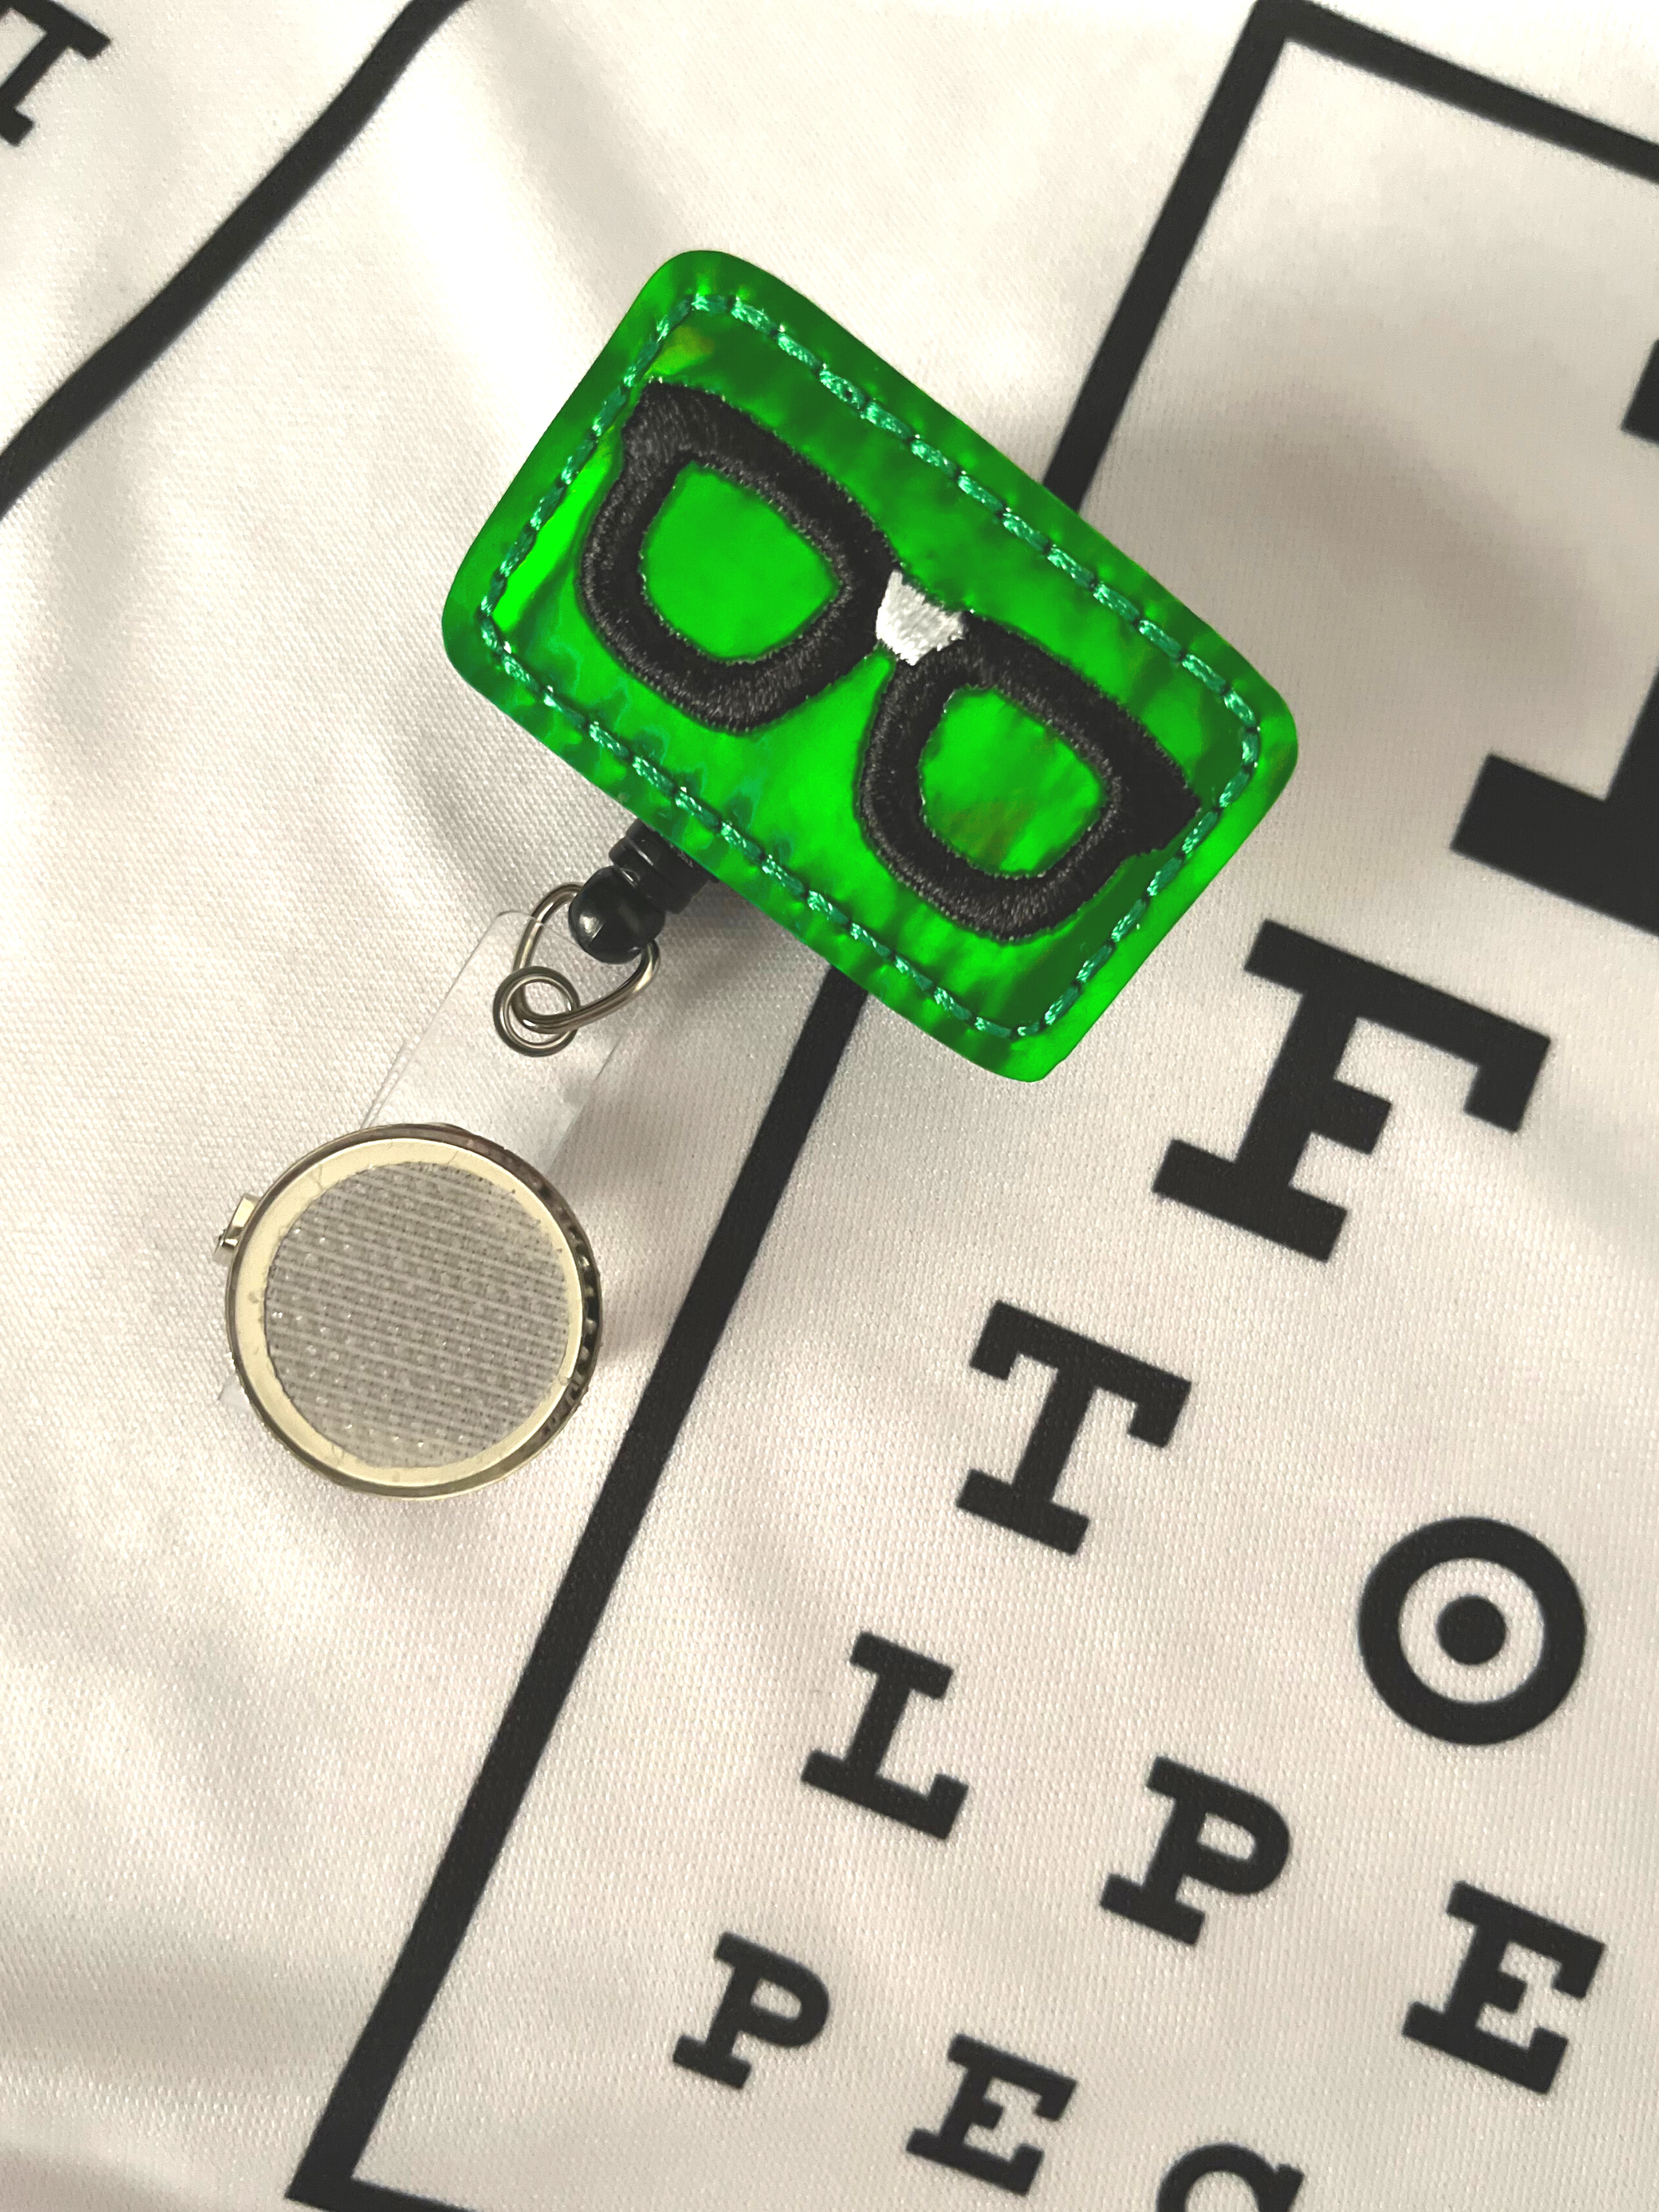 Green Glasses Badge Reel Accessory on White 20/20 Vision Scrub Top